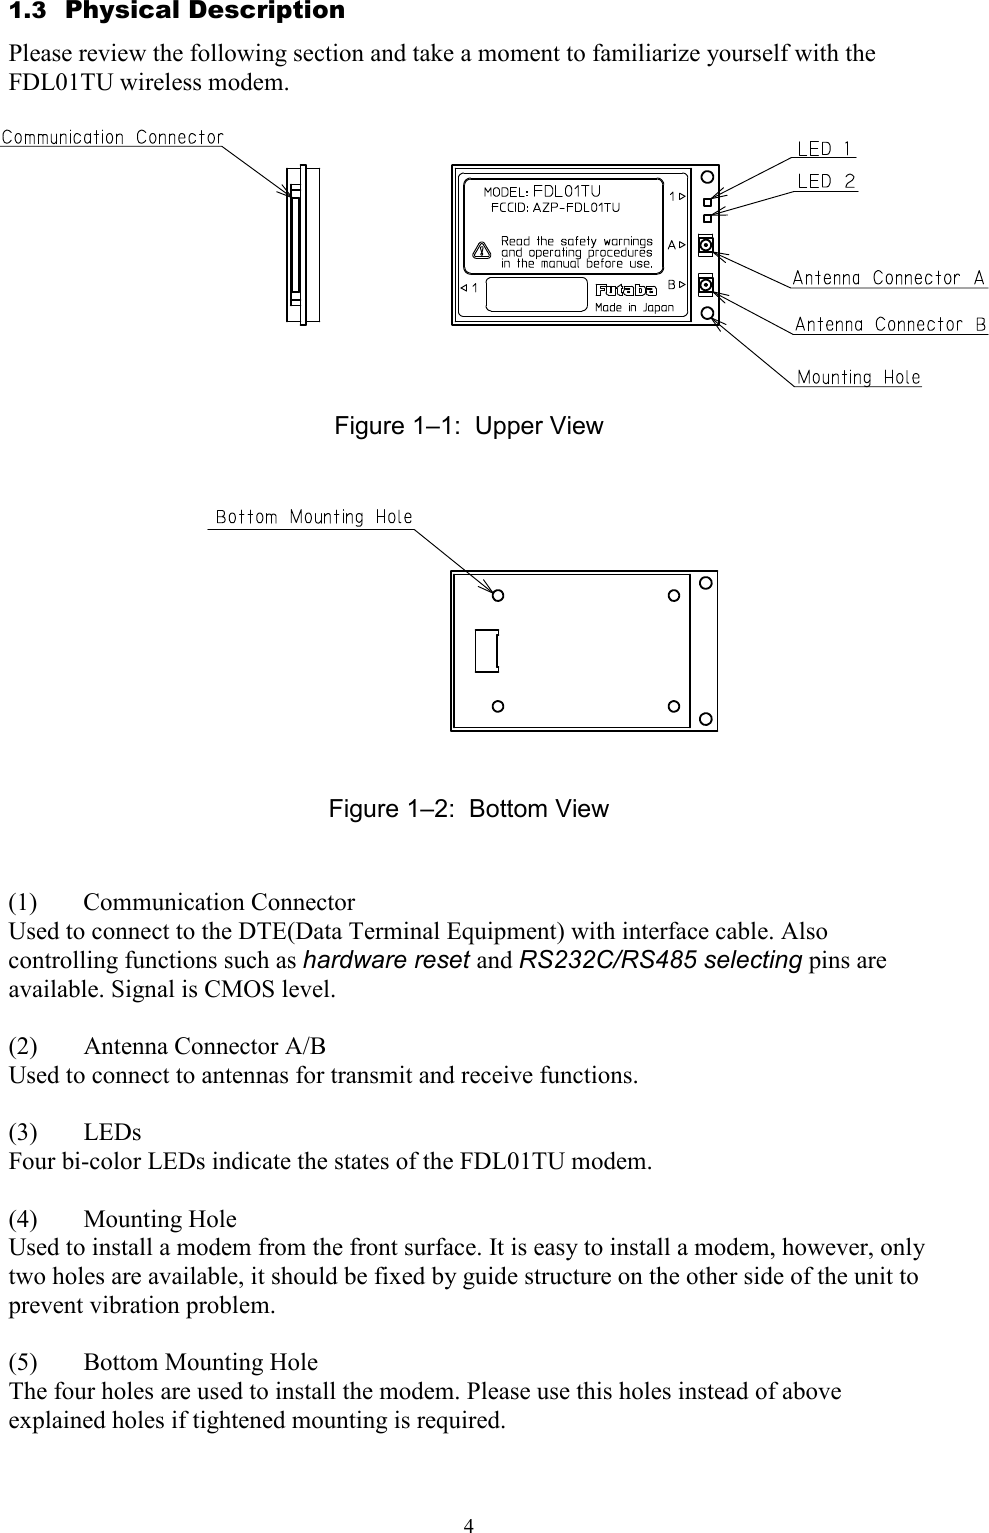   41.3  Physical Description Please review the following section and take a moment to familiarize yourself with the FDL01TU wireless modem.         Figure 1–1:  Upper View              Figure 1–2:  Bottom View  (1)  Communication Connector Used to connect to the DTE(Data Terminal Equipment) with interface cable. Also controlling functions such as hardware reset and RS232C/RS485 selecting pins are available. Signal is CMOS level.   (2)  Antenna Connector A/B Used to connect to antennas for transmit and receive functions.  (3)  LEDs Four bi-color LEDs indicate the states of the FDL01TU modem.  (4)  Mounting Hole Used to install a modem from the front surface. It is easy to install a modem, however, only two holes are available, it should be fixed by guide structure on the other side of the unit to prevent vibration problem.  (5)  Bottom Mounting Hole The four holes are used to install the modem. Please use this holes instead of above explained holes if tightened mounting is required.   